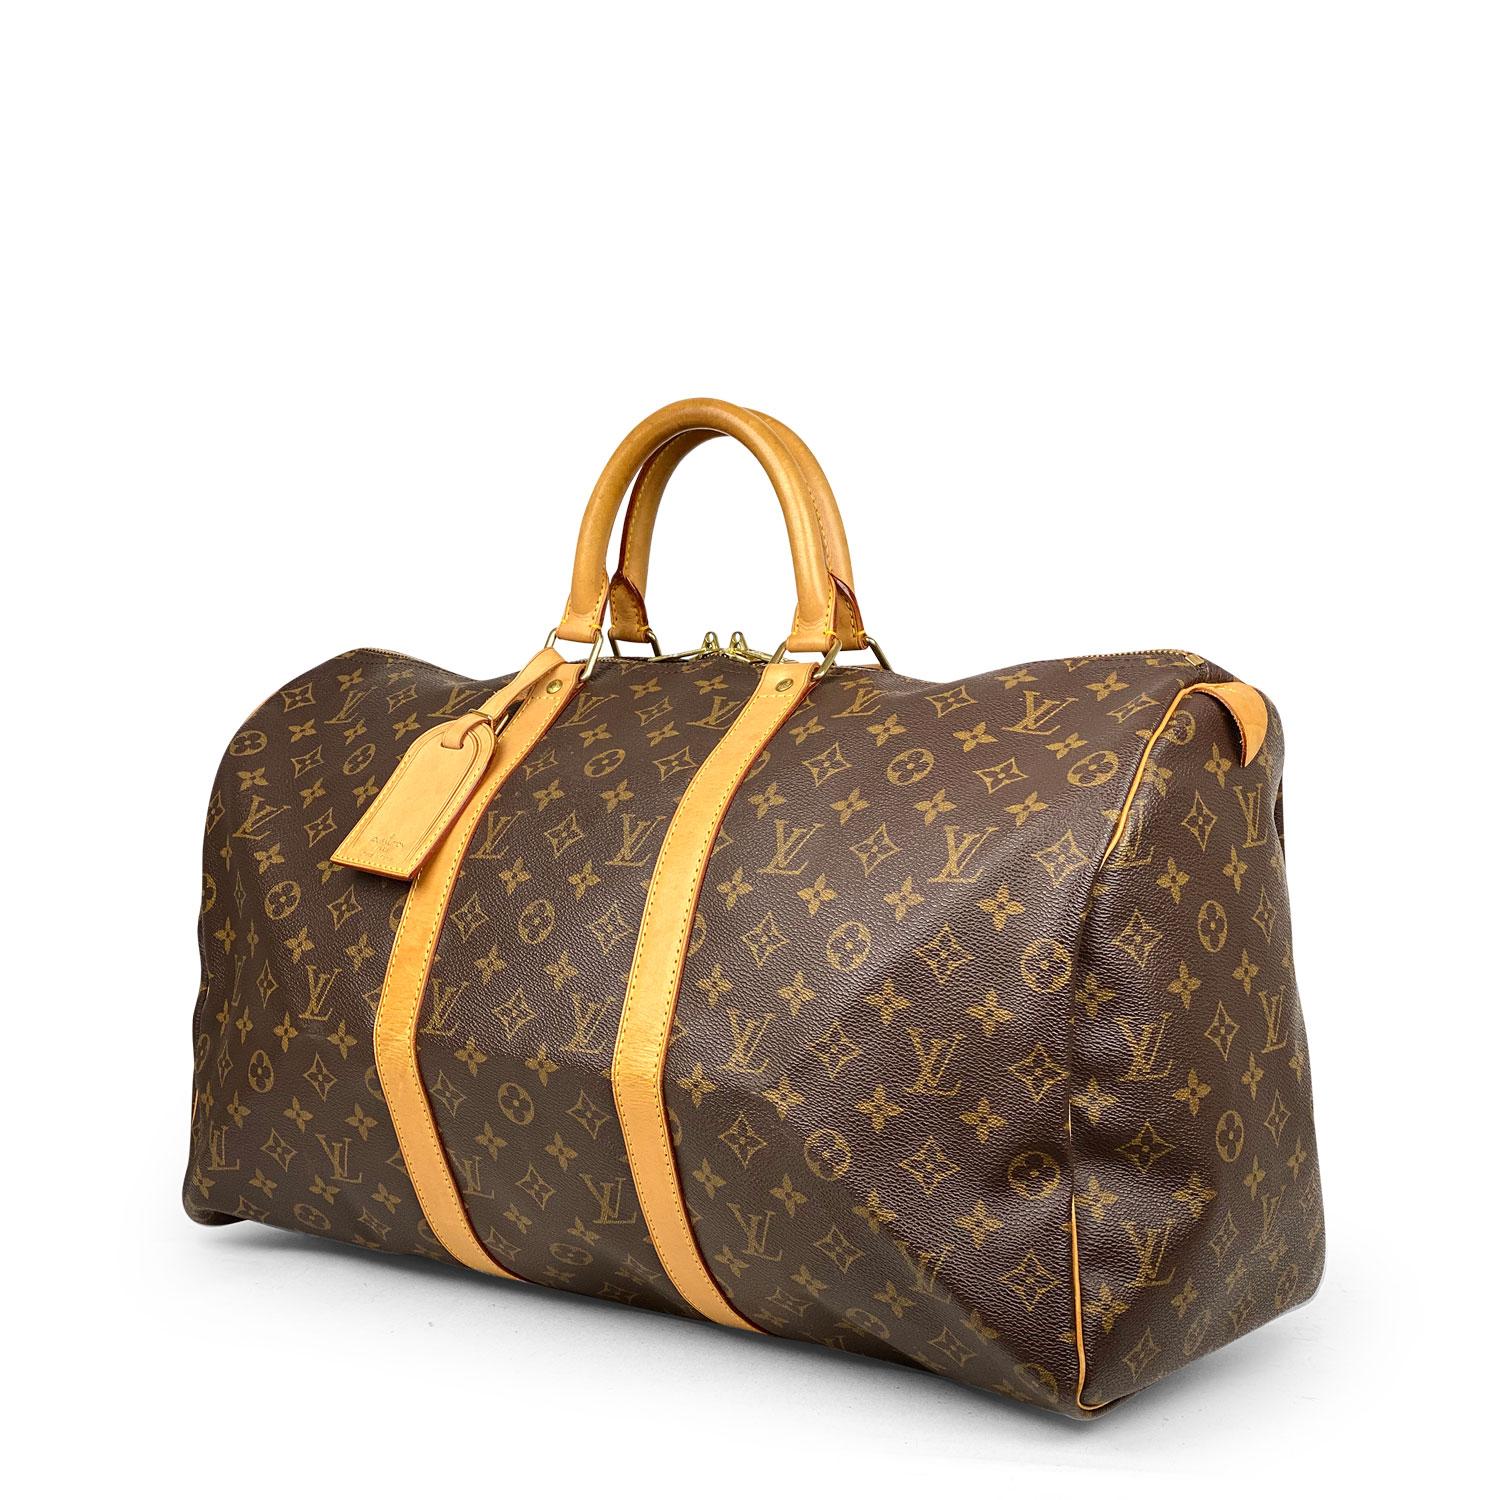 Brown and tan monogram coated canvas Louis Vuitton Keepall 50 with

- Brass hardware
- Tan vachetta leather trim
- Dual rolled top handles
- Tonal canvas lining and two-way zip closure at top

Overall Preloved Condition: Very Good
Exterior